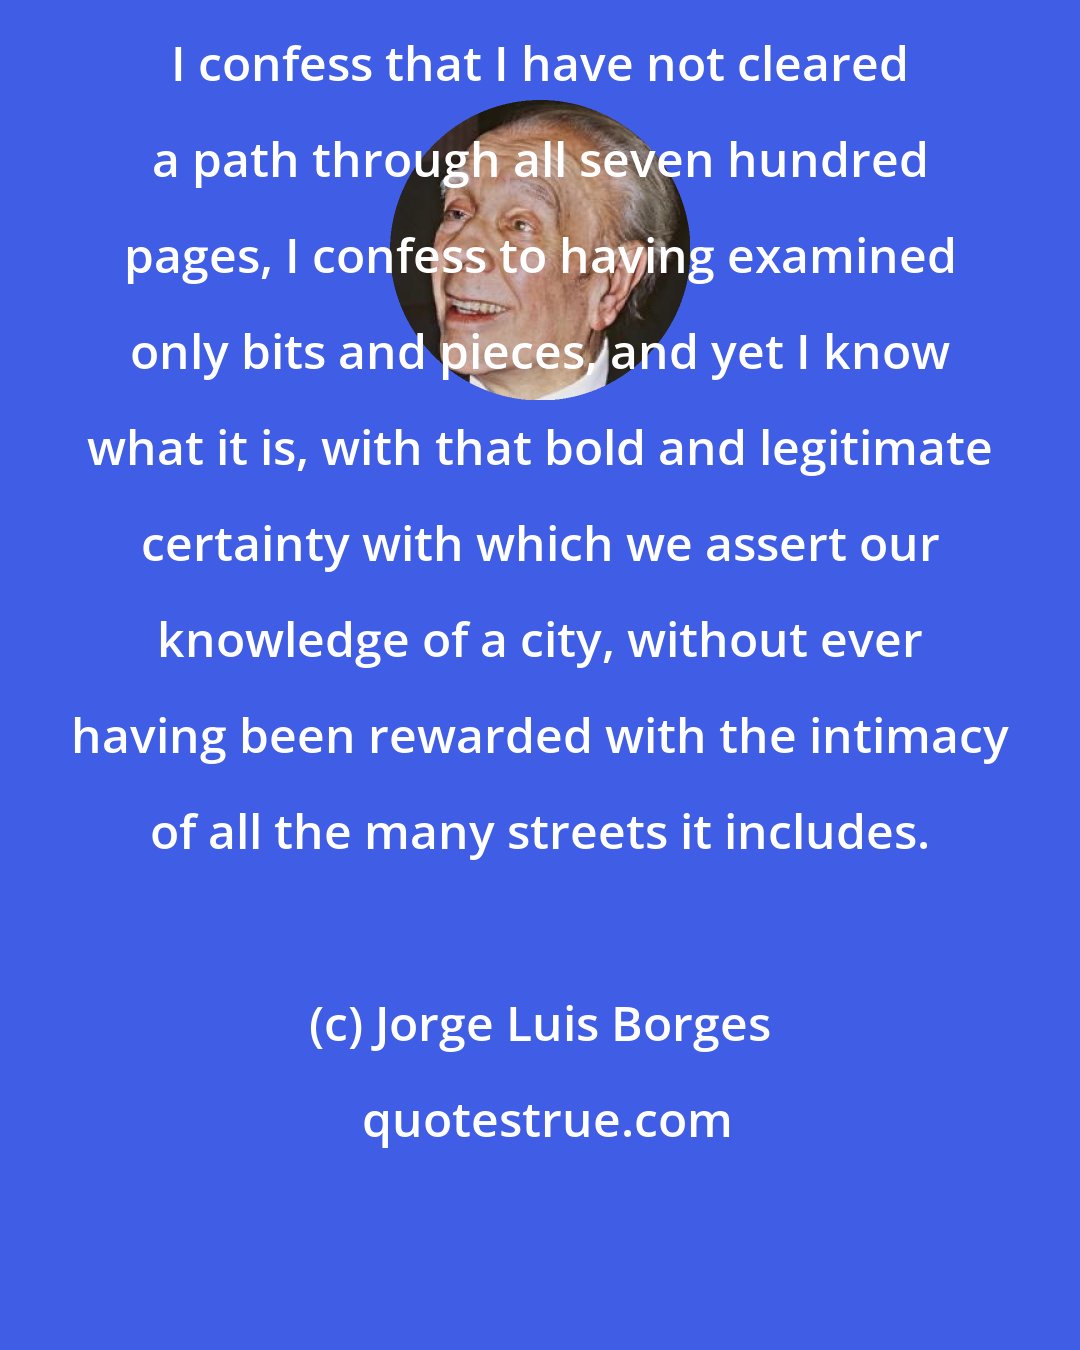 Jorge Luis Borges: I confess that I have not cleared a path through all seven hundred pages, I confess to having examined only bits and pieces, and yet I know what it is, with that bold and legitimate certainty with which we assert our knowledge of a city, without ever having been rewarded with the intimacy of all the many streets it includes.